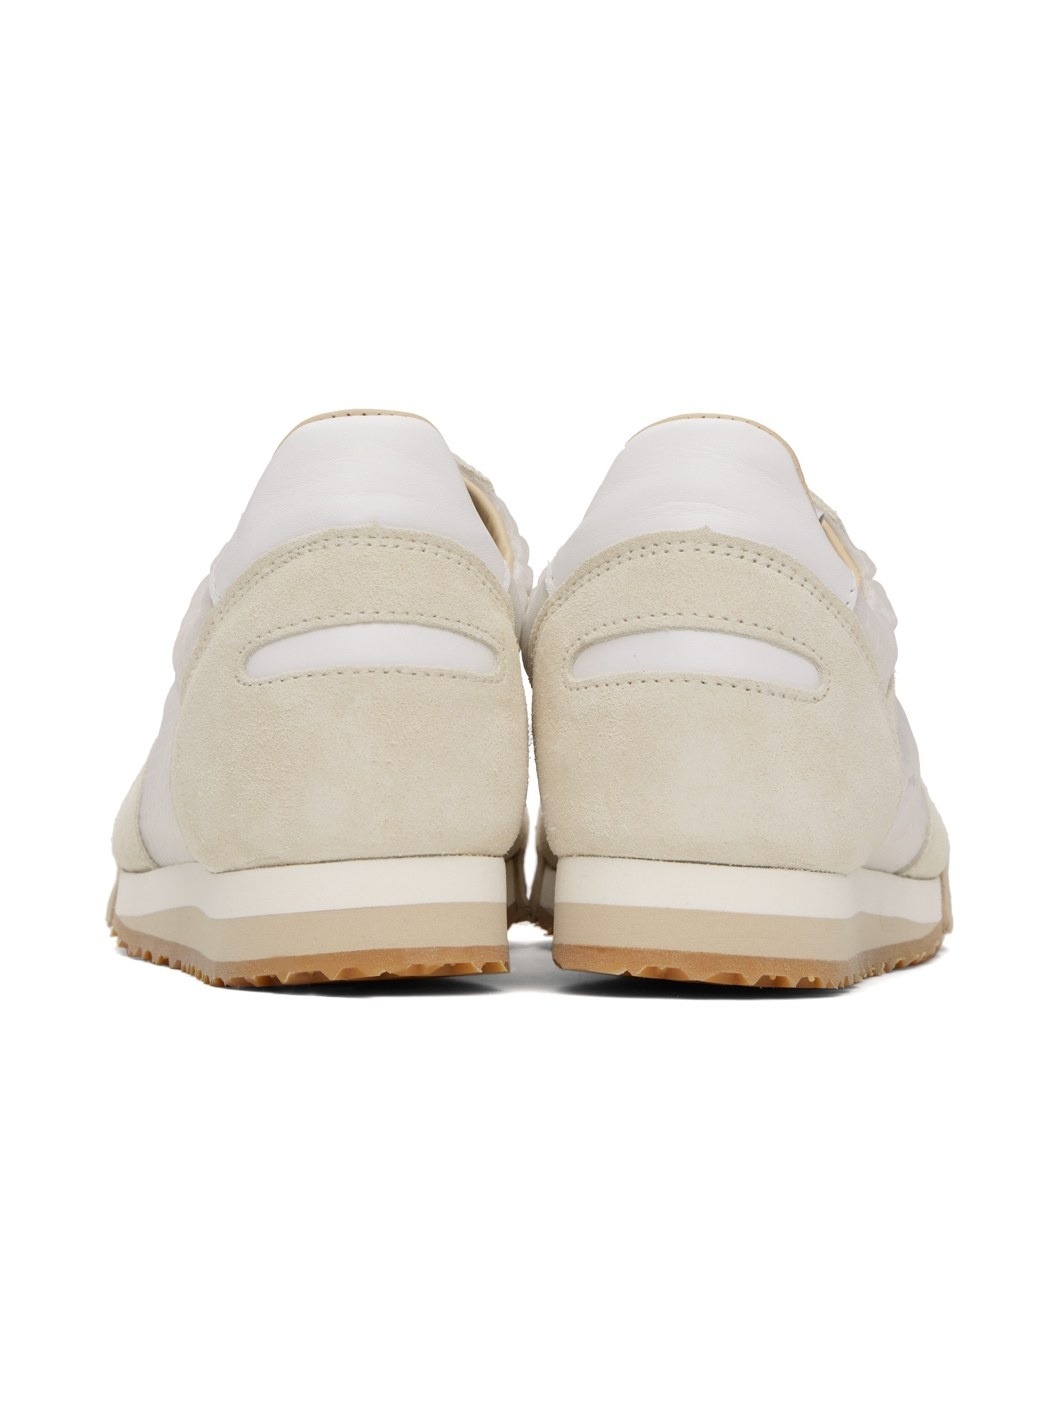 White & Beige Pitch Low Sneakers - 2